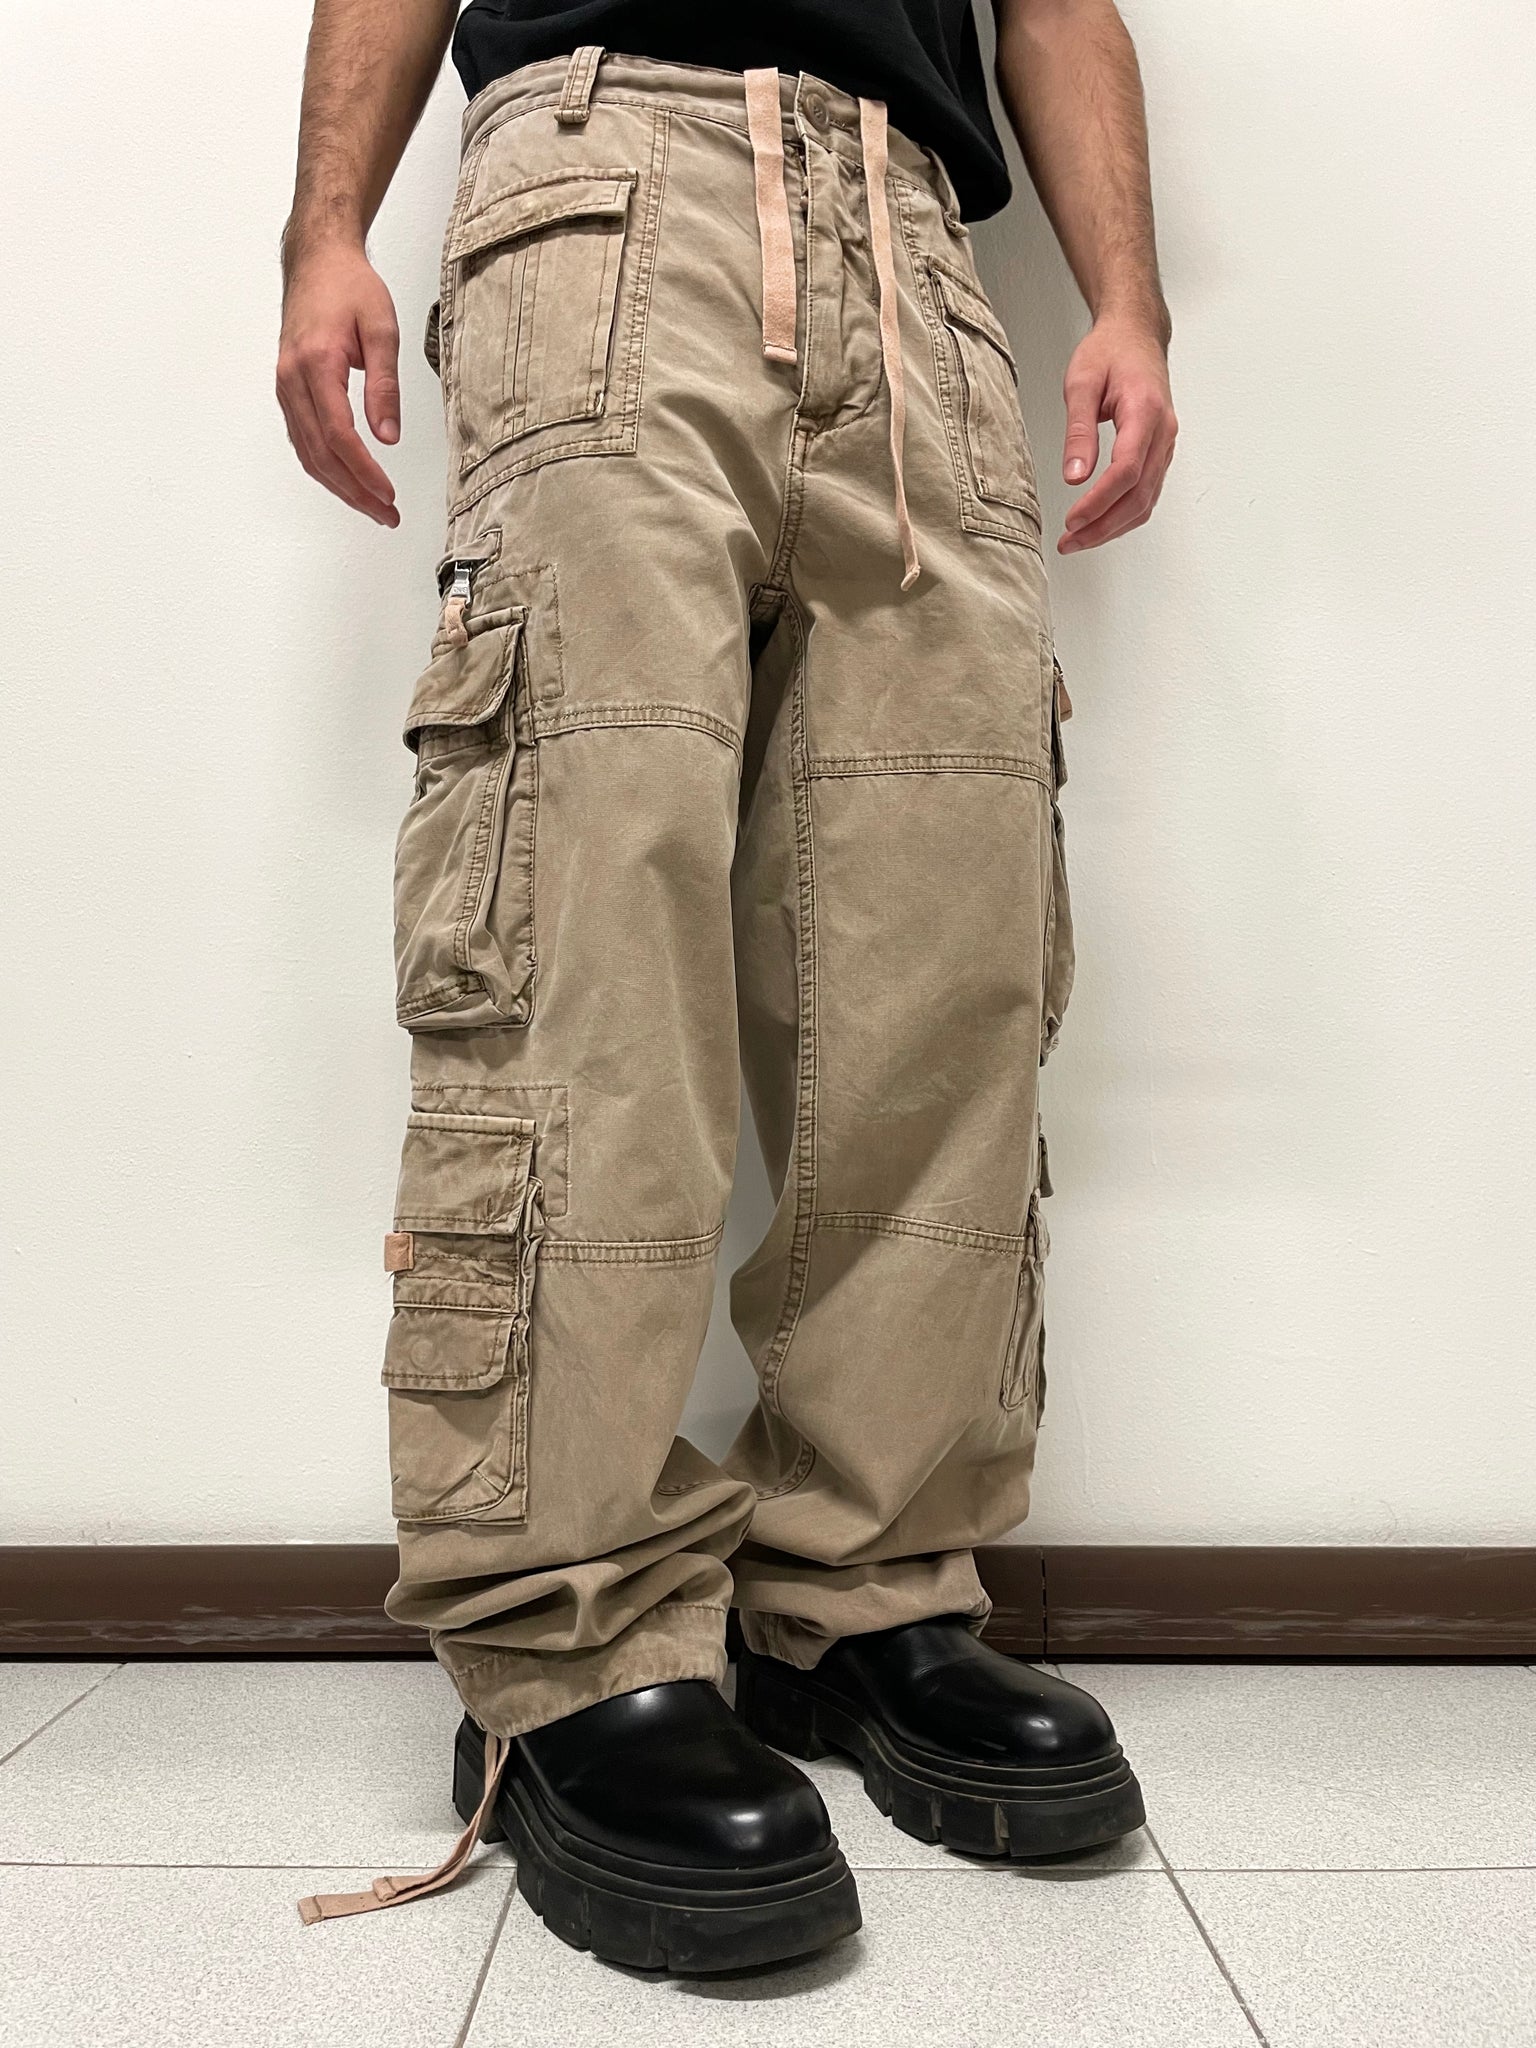 2000s Dolce & Gabbana 18 pockets cargo pants – elevated archives